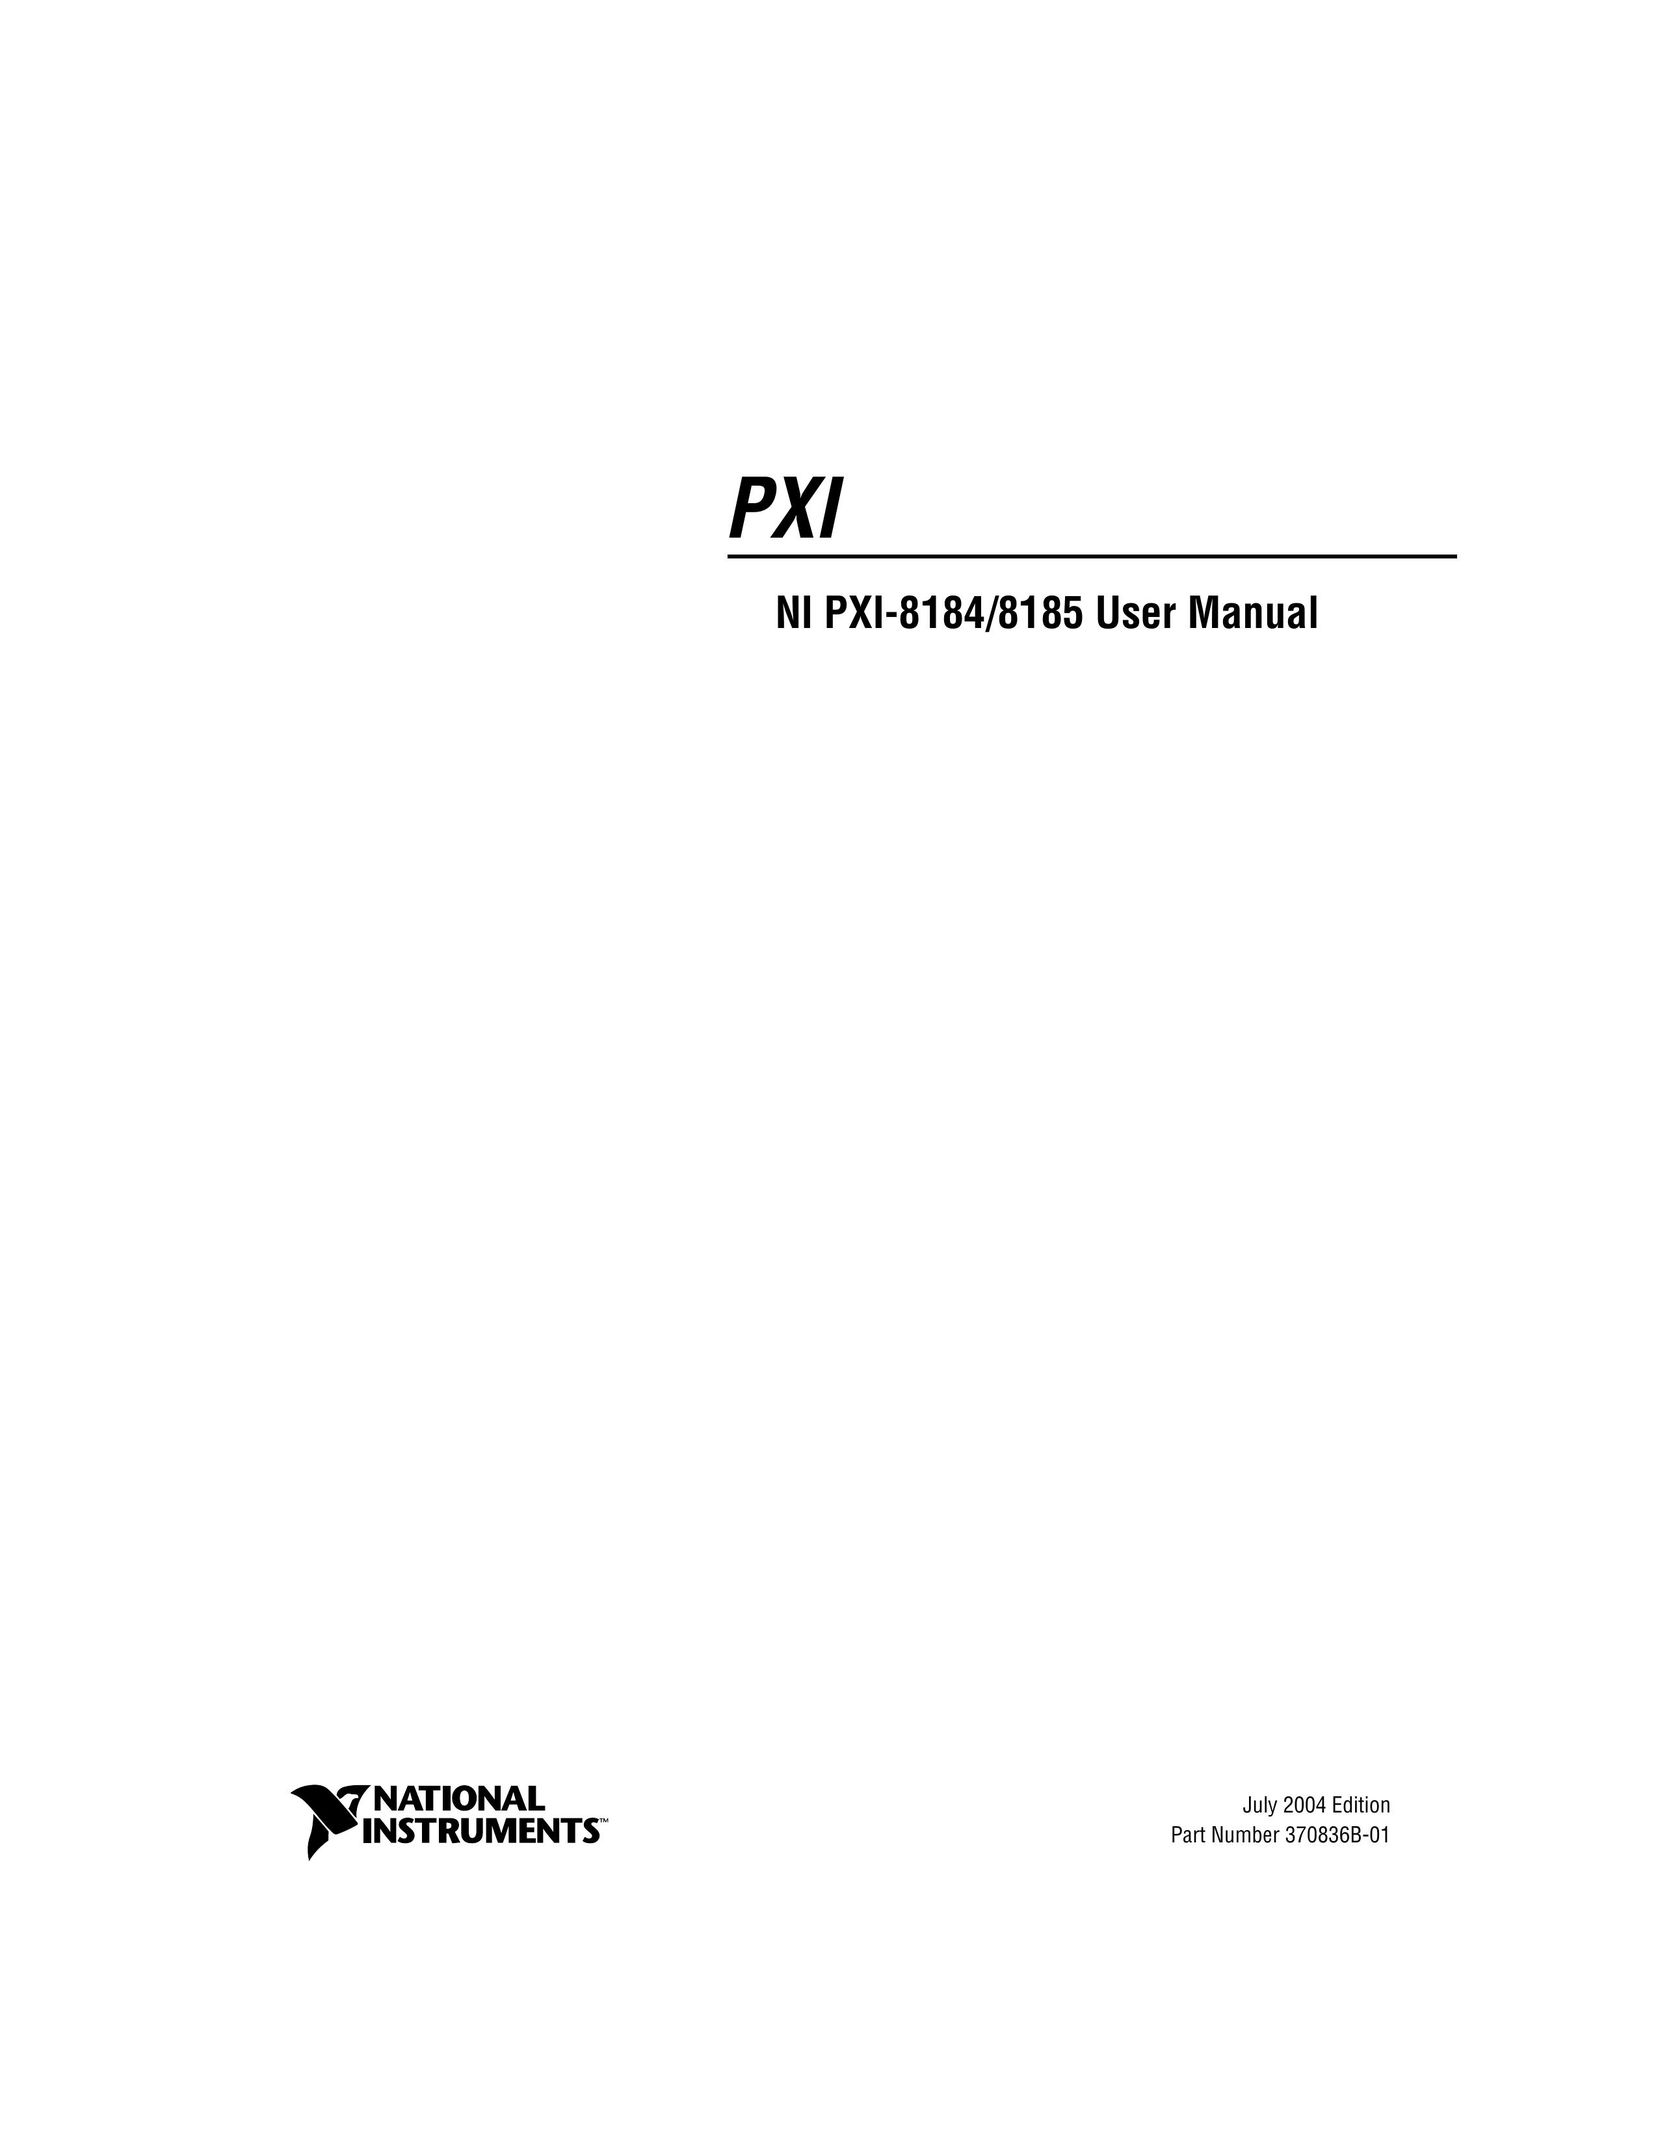 National Instruments PXI-8184 Personal Computer User Manual